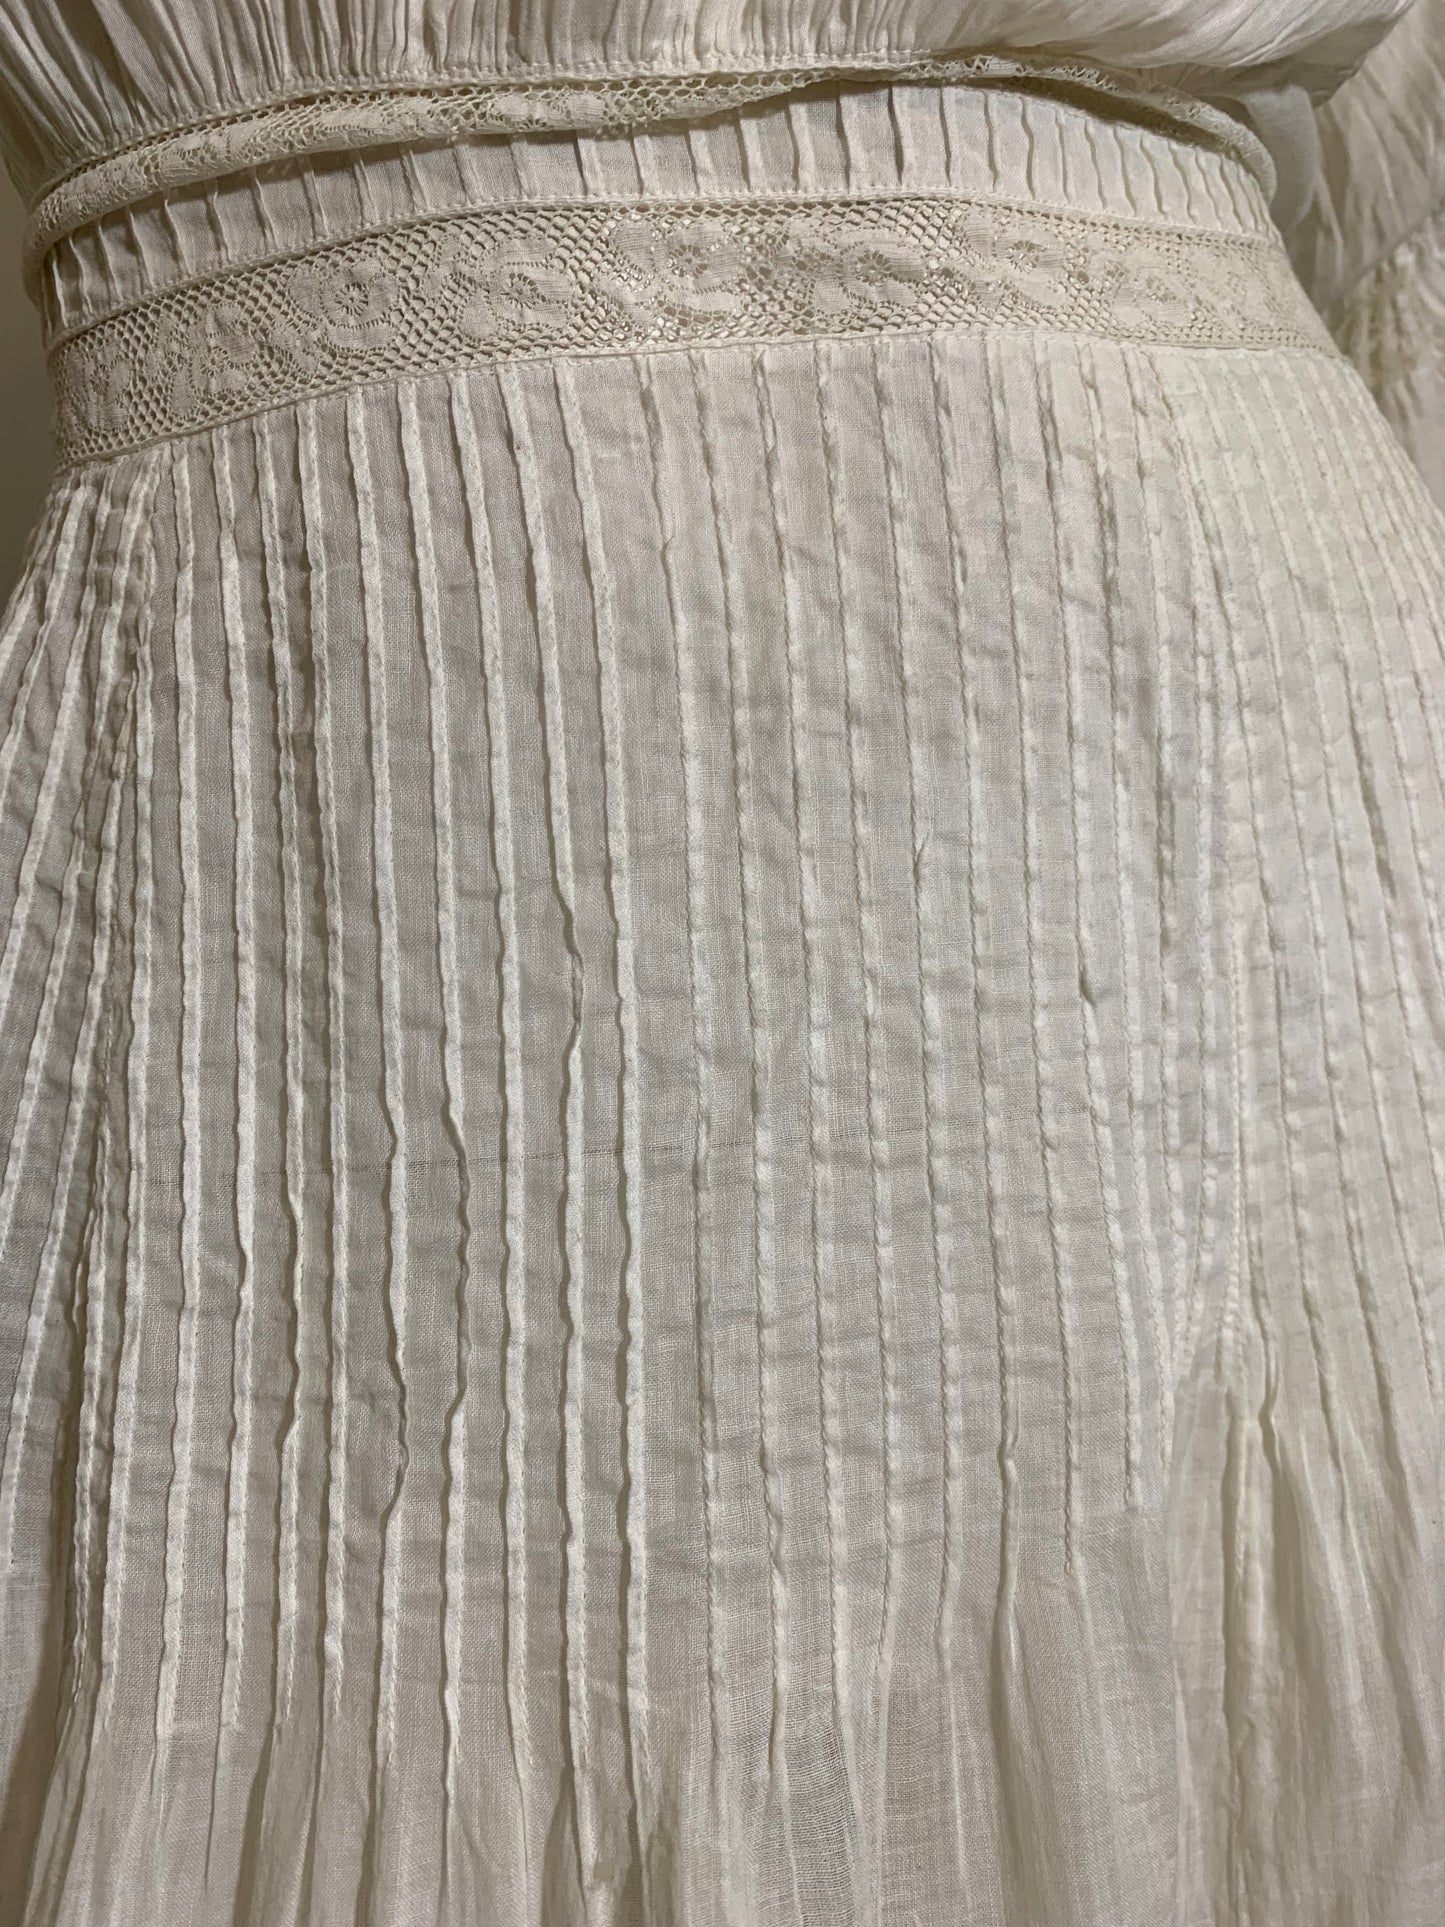 Sweet White Lawn Cotton Pin Tucked Lace Trimmed Garden Party Dress circa 1890s